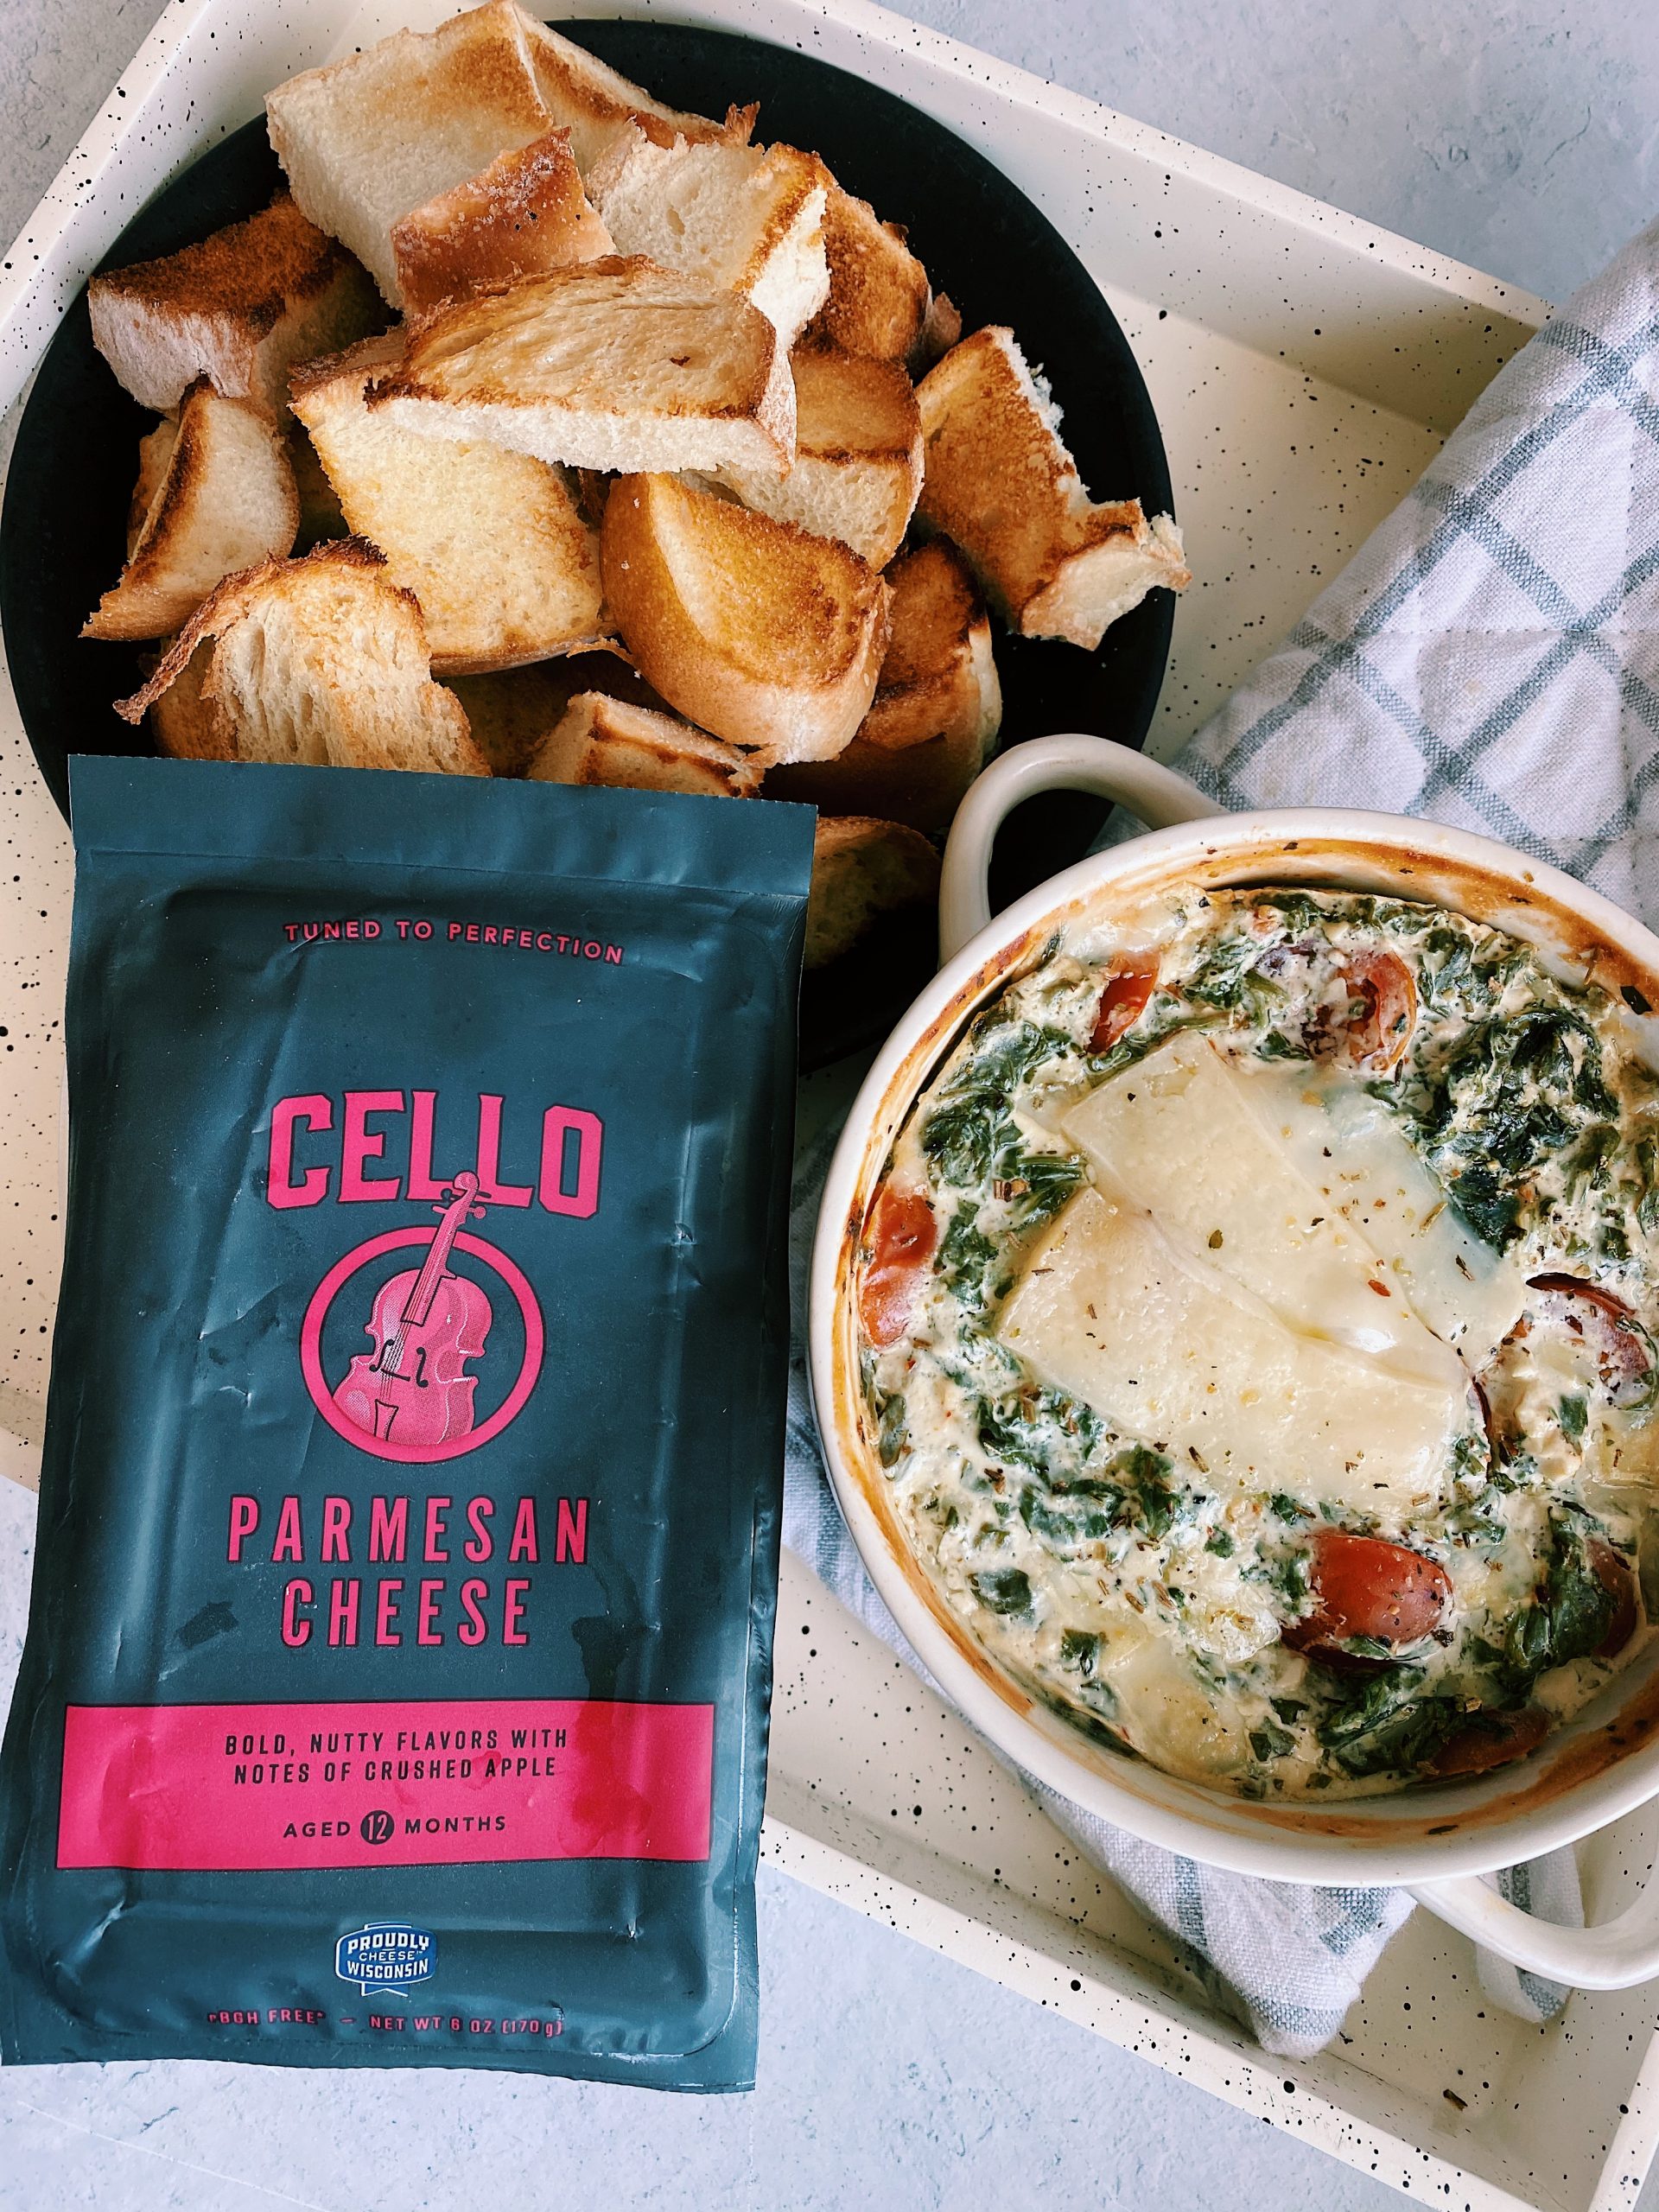 baked spinach and roasted tomato dip beside pieces of crusty bread and block of Cello parmesan cheese.